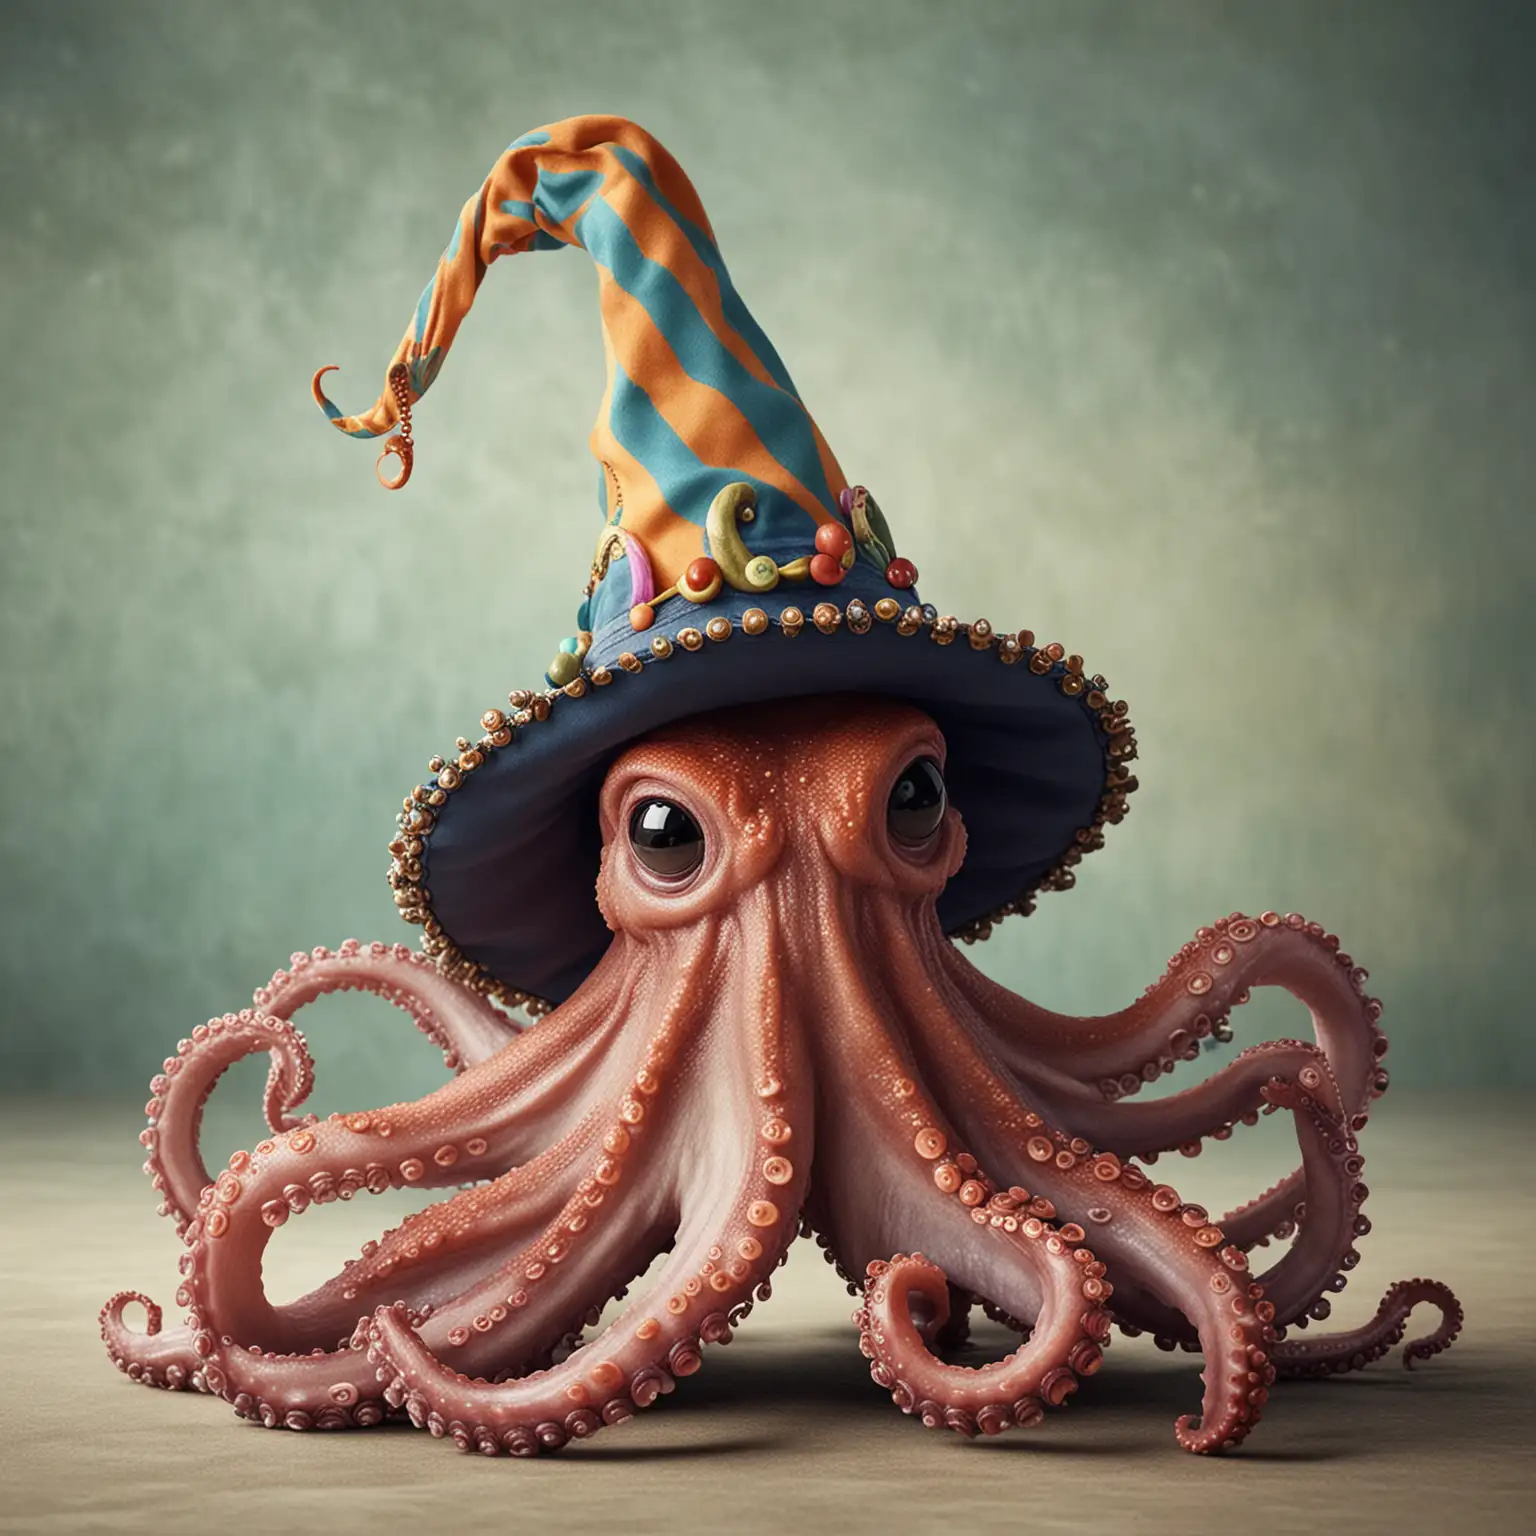 Playful Octopus Wearing a Colorful Jester Hat